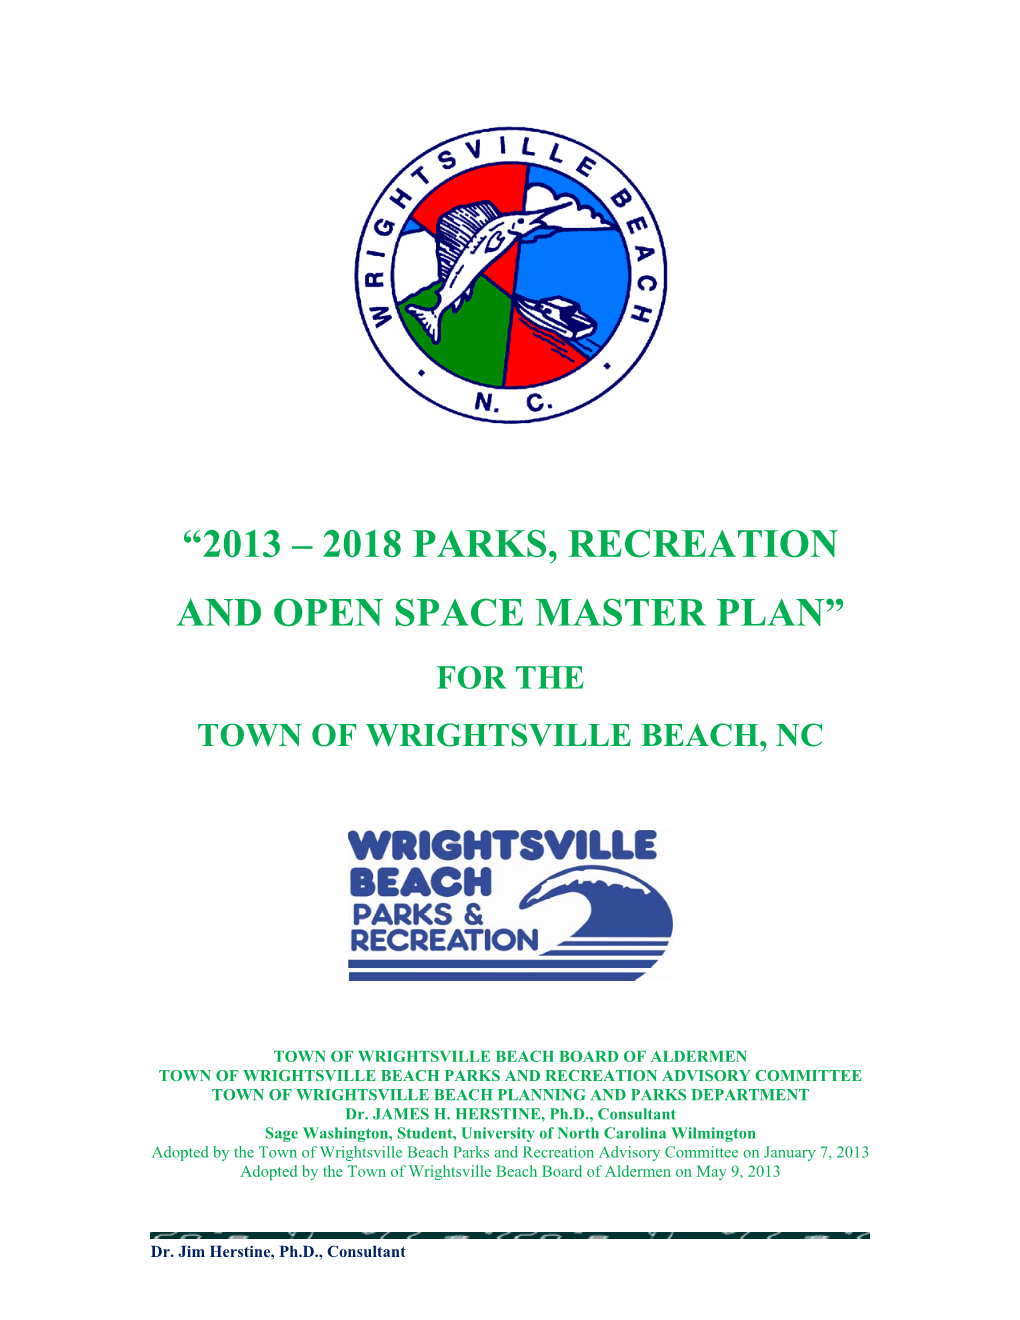 2013 – 2018 Parks, Recreation and Open Space Master Plan” for the Town of Wrightsville Beach, Nc